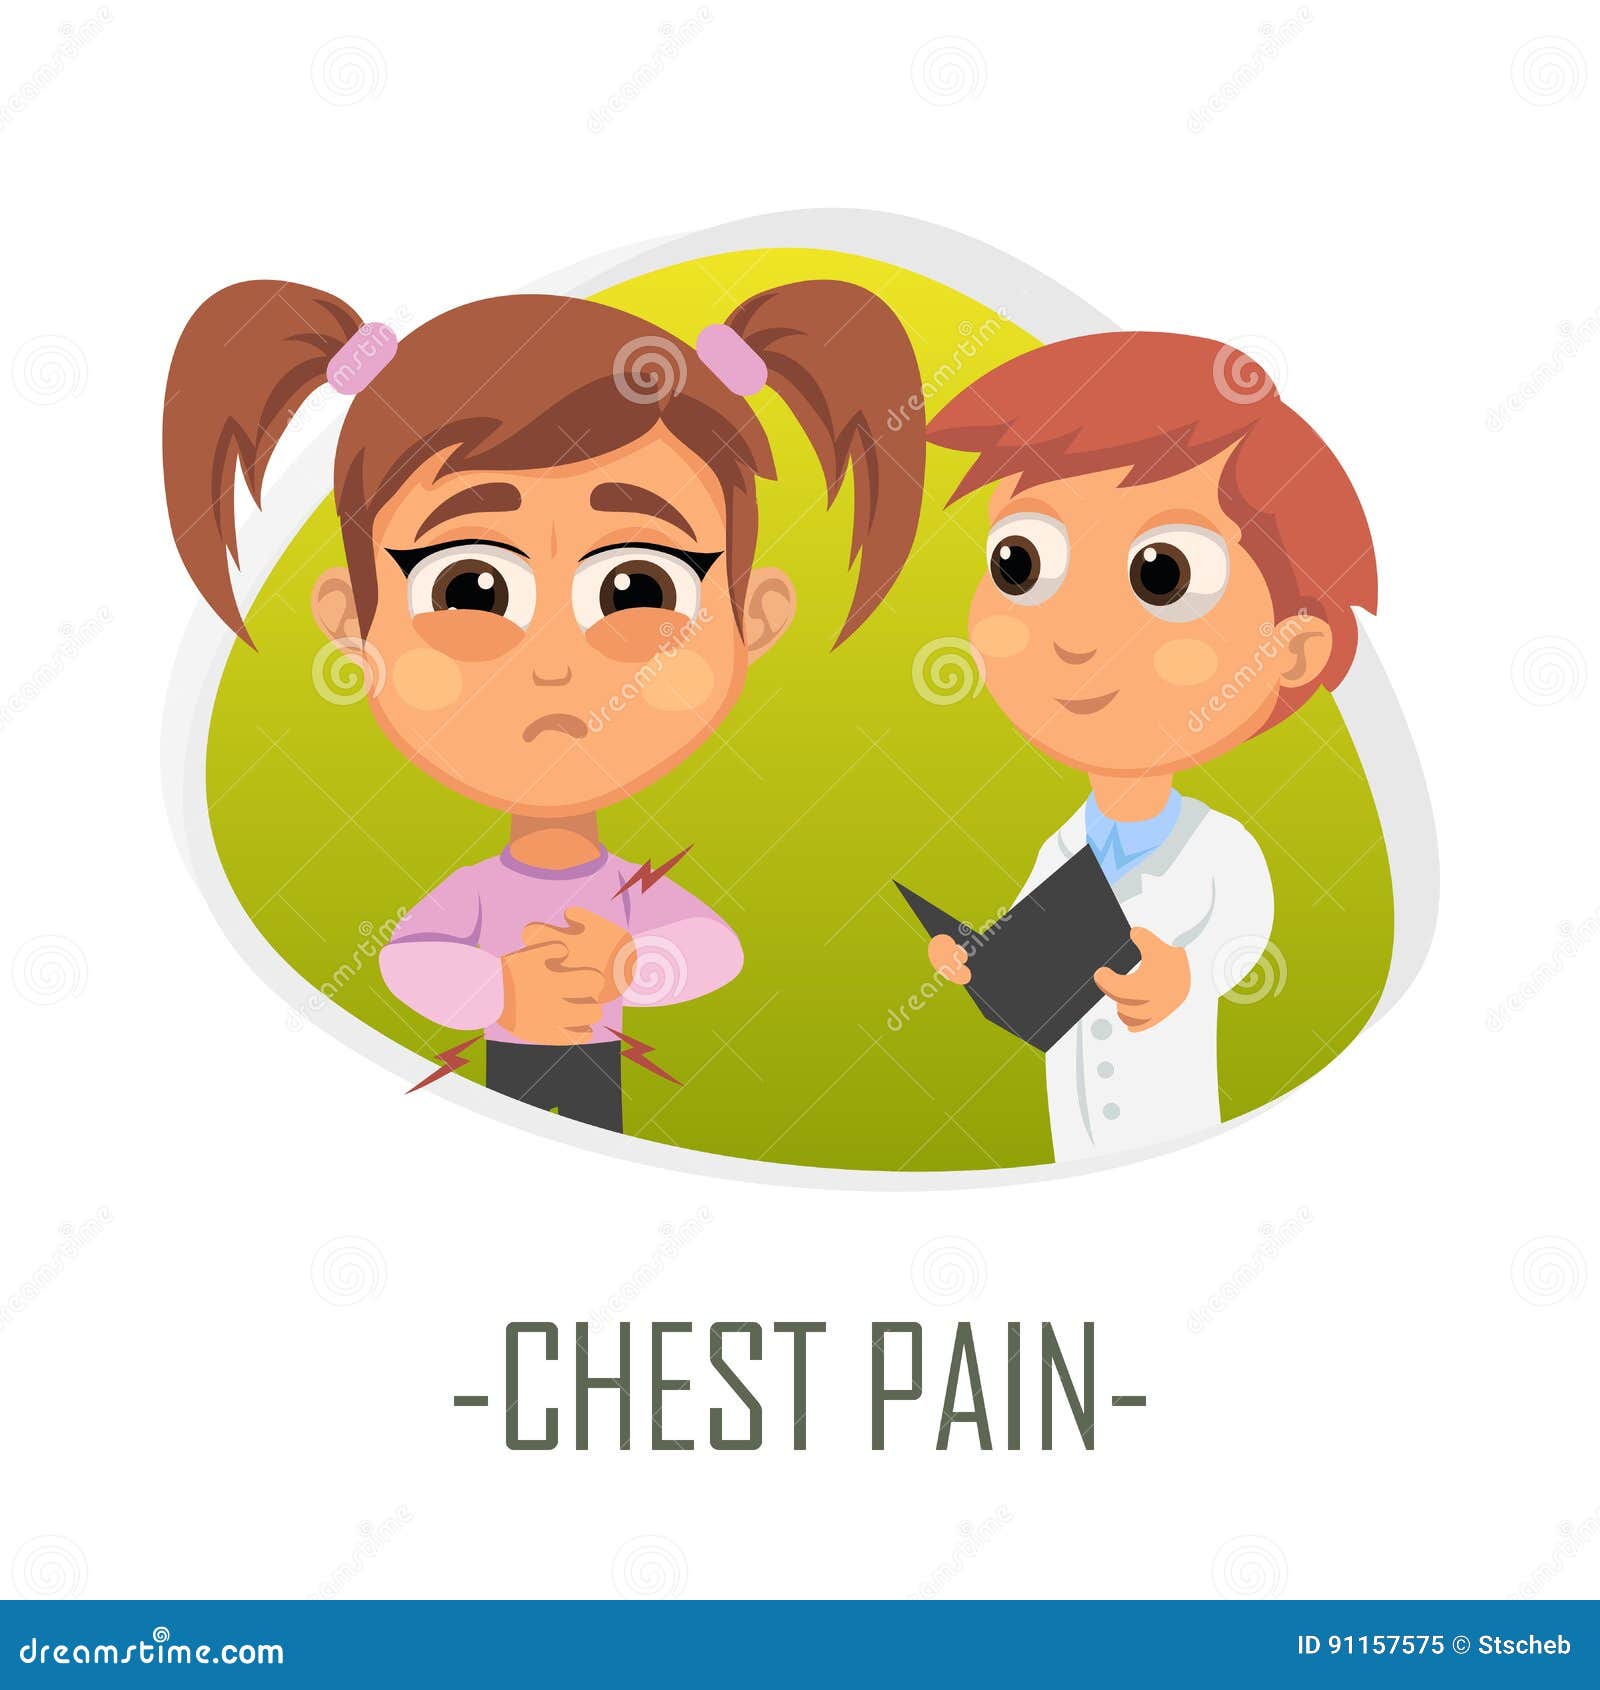 Chest Pain Medical Concept. Vector Illustration. Stock Vector